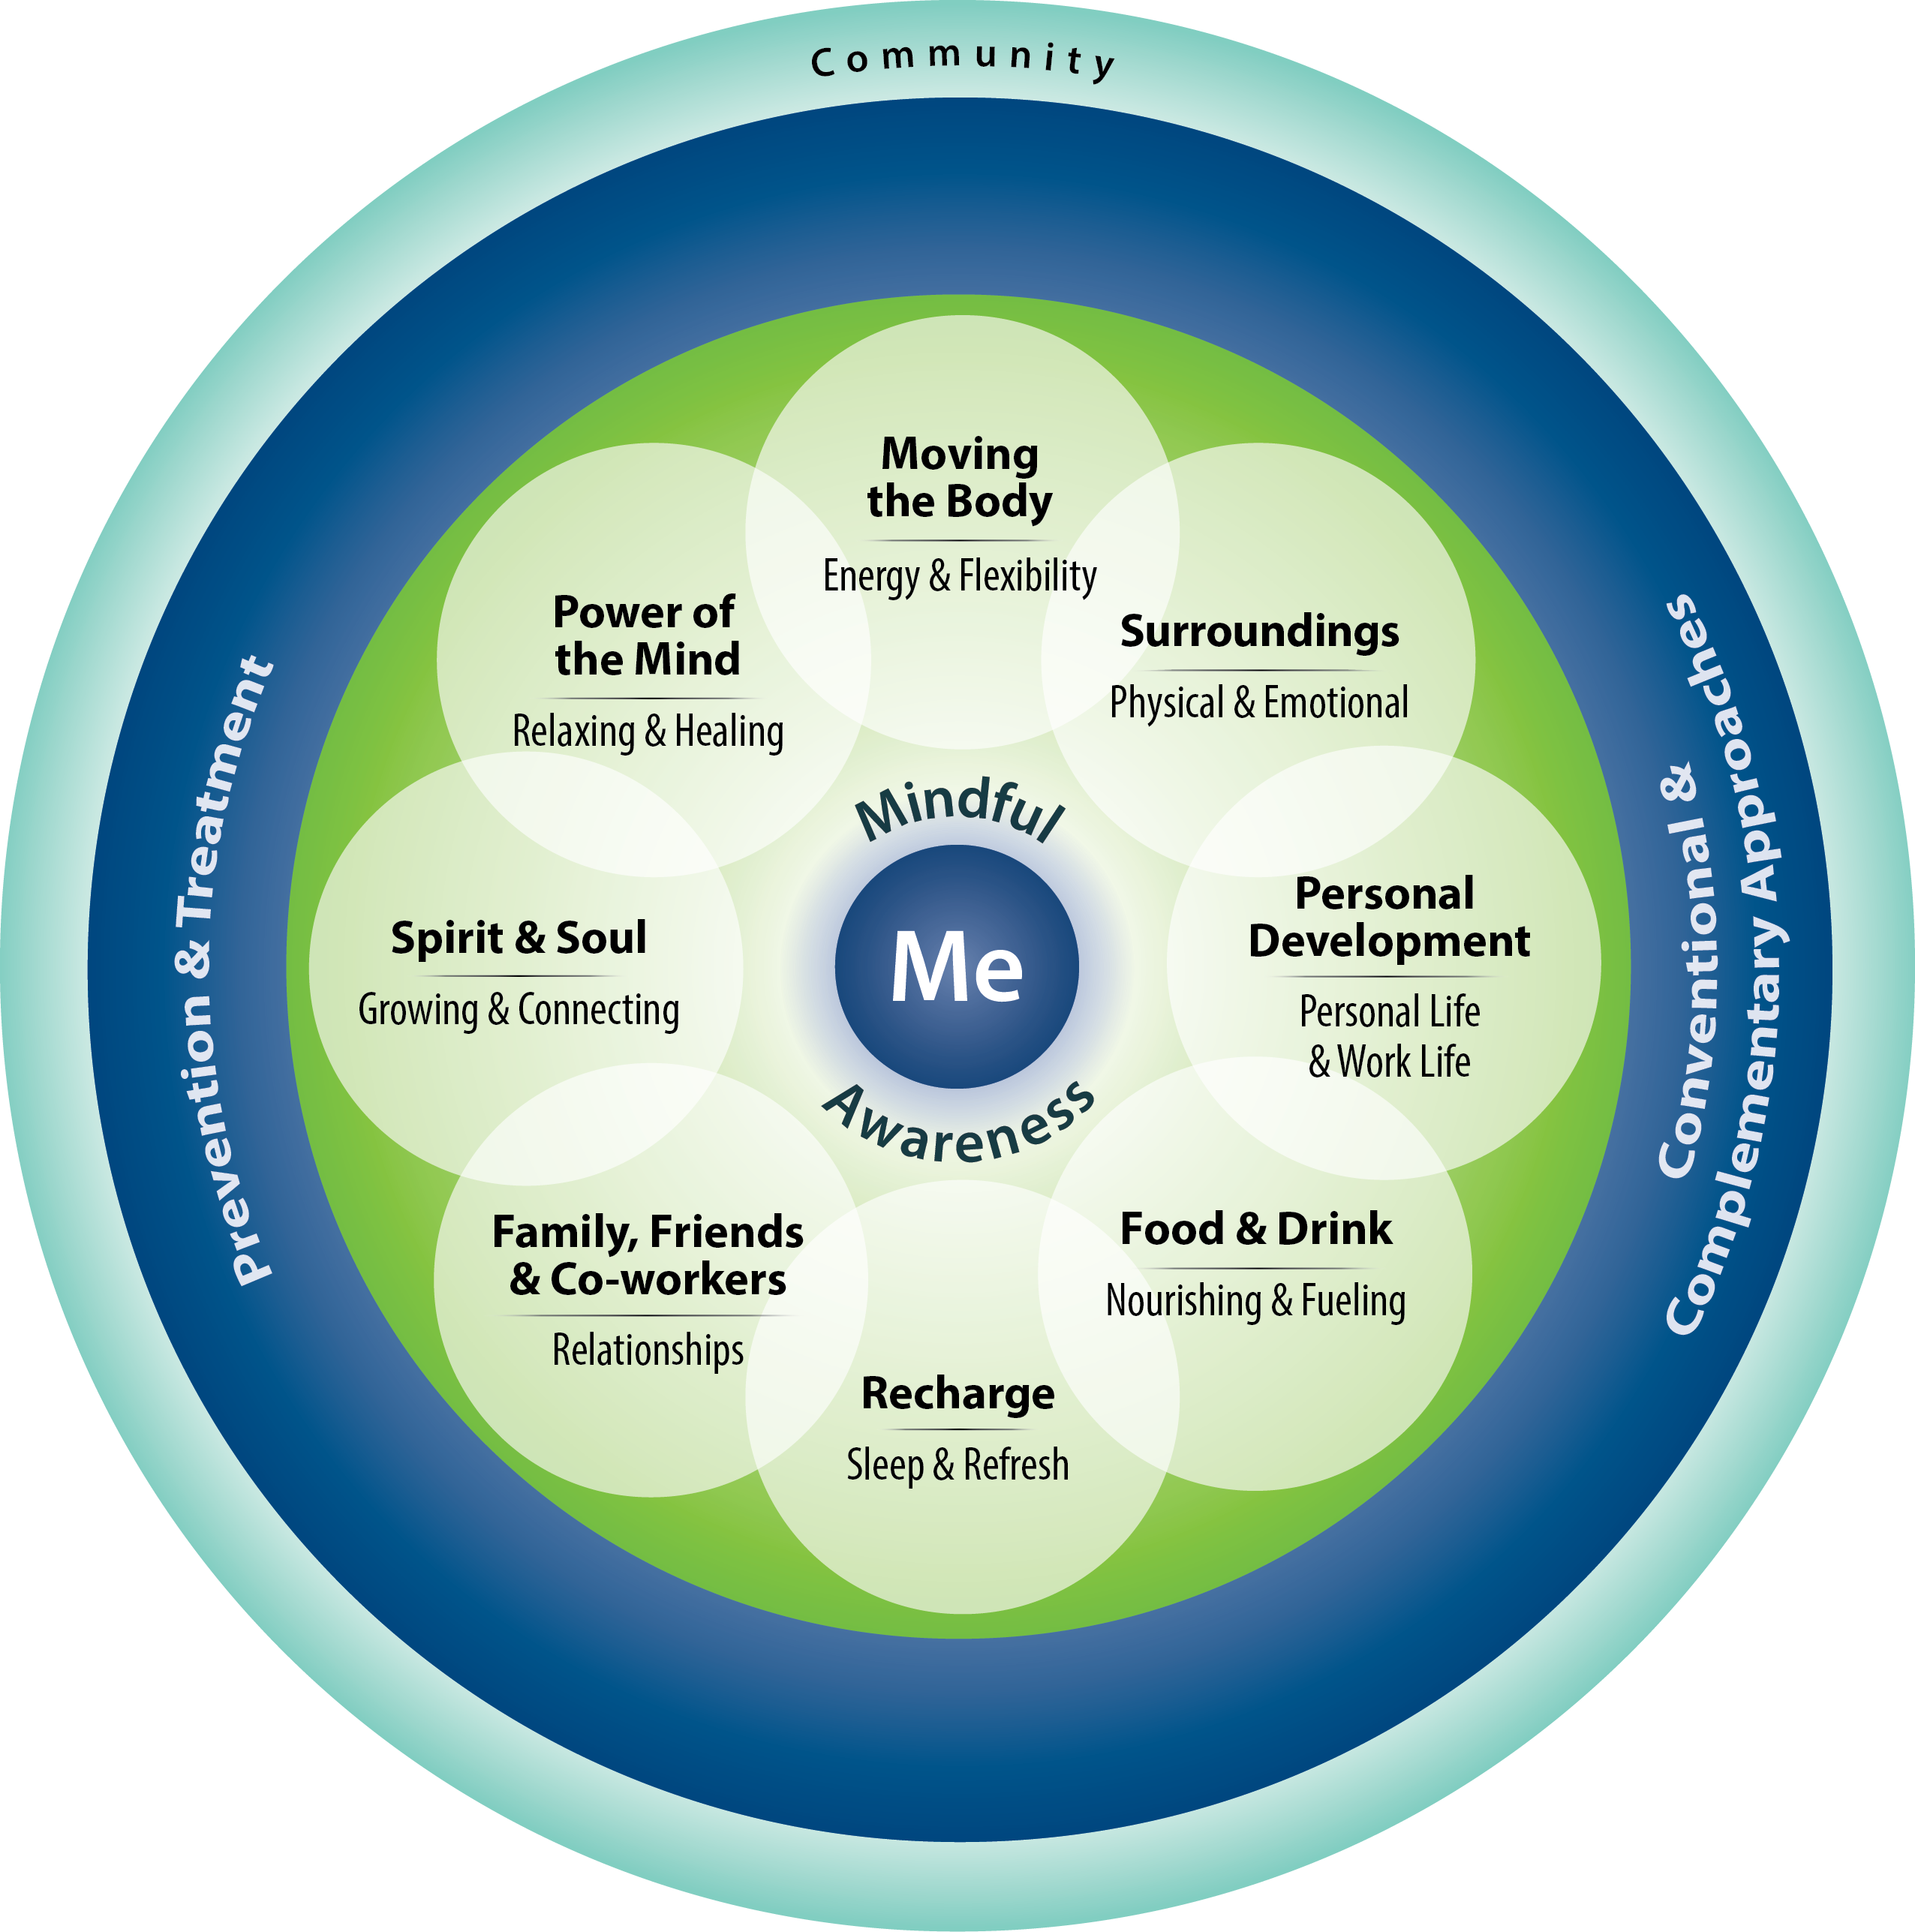 Image of the Circle of Health model. Me in the center going out through mindful awareness and surrounded by eight self-care components (Moving the body; surroundings; personal development; food and drink; recharge; family, friends, and co-workers; spirit and soul; power of the mind). Next ring includes conventional and complementary approaches with prevention and treatment. The outermost circle displays community.